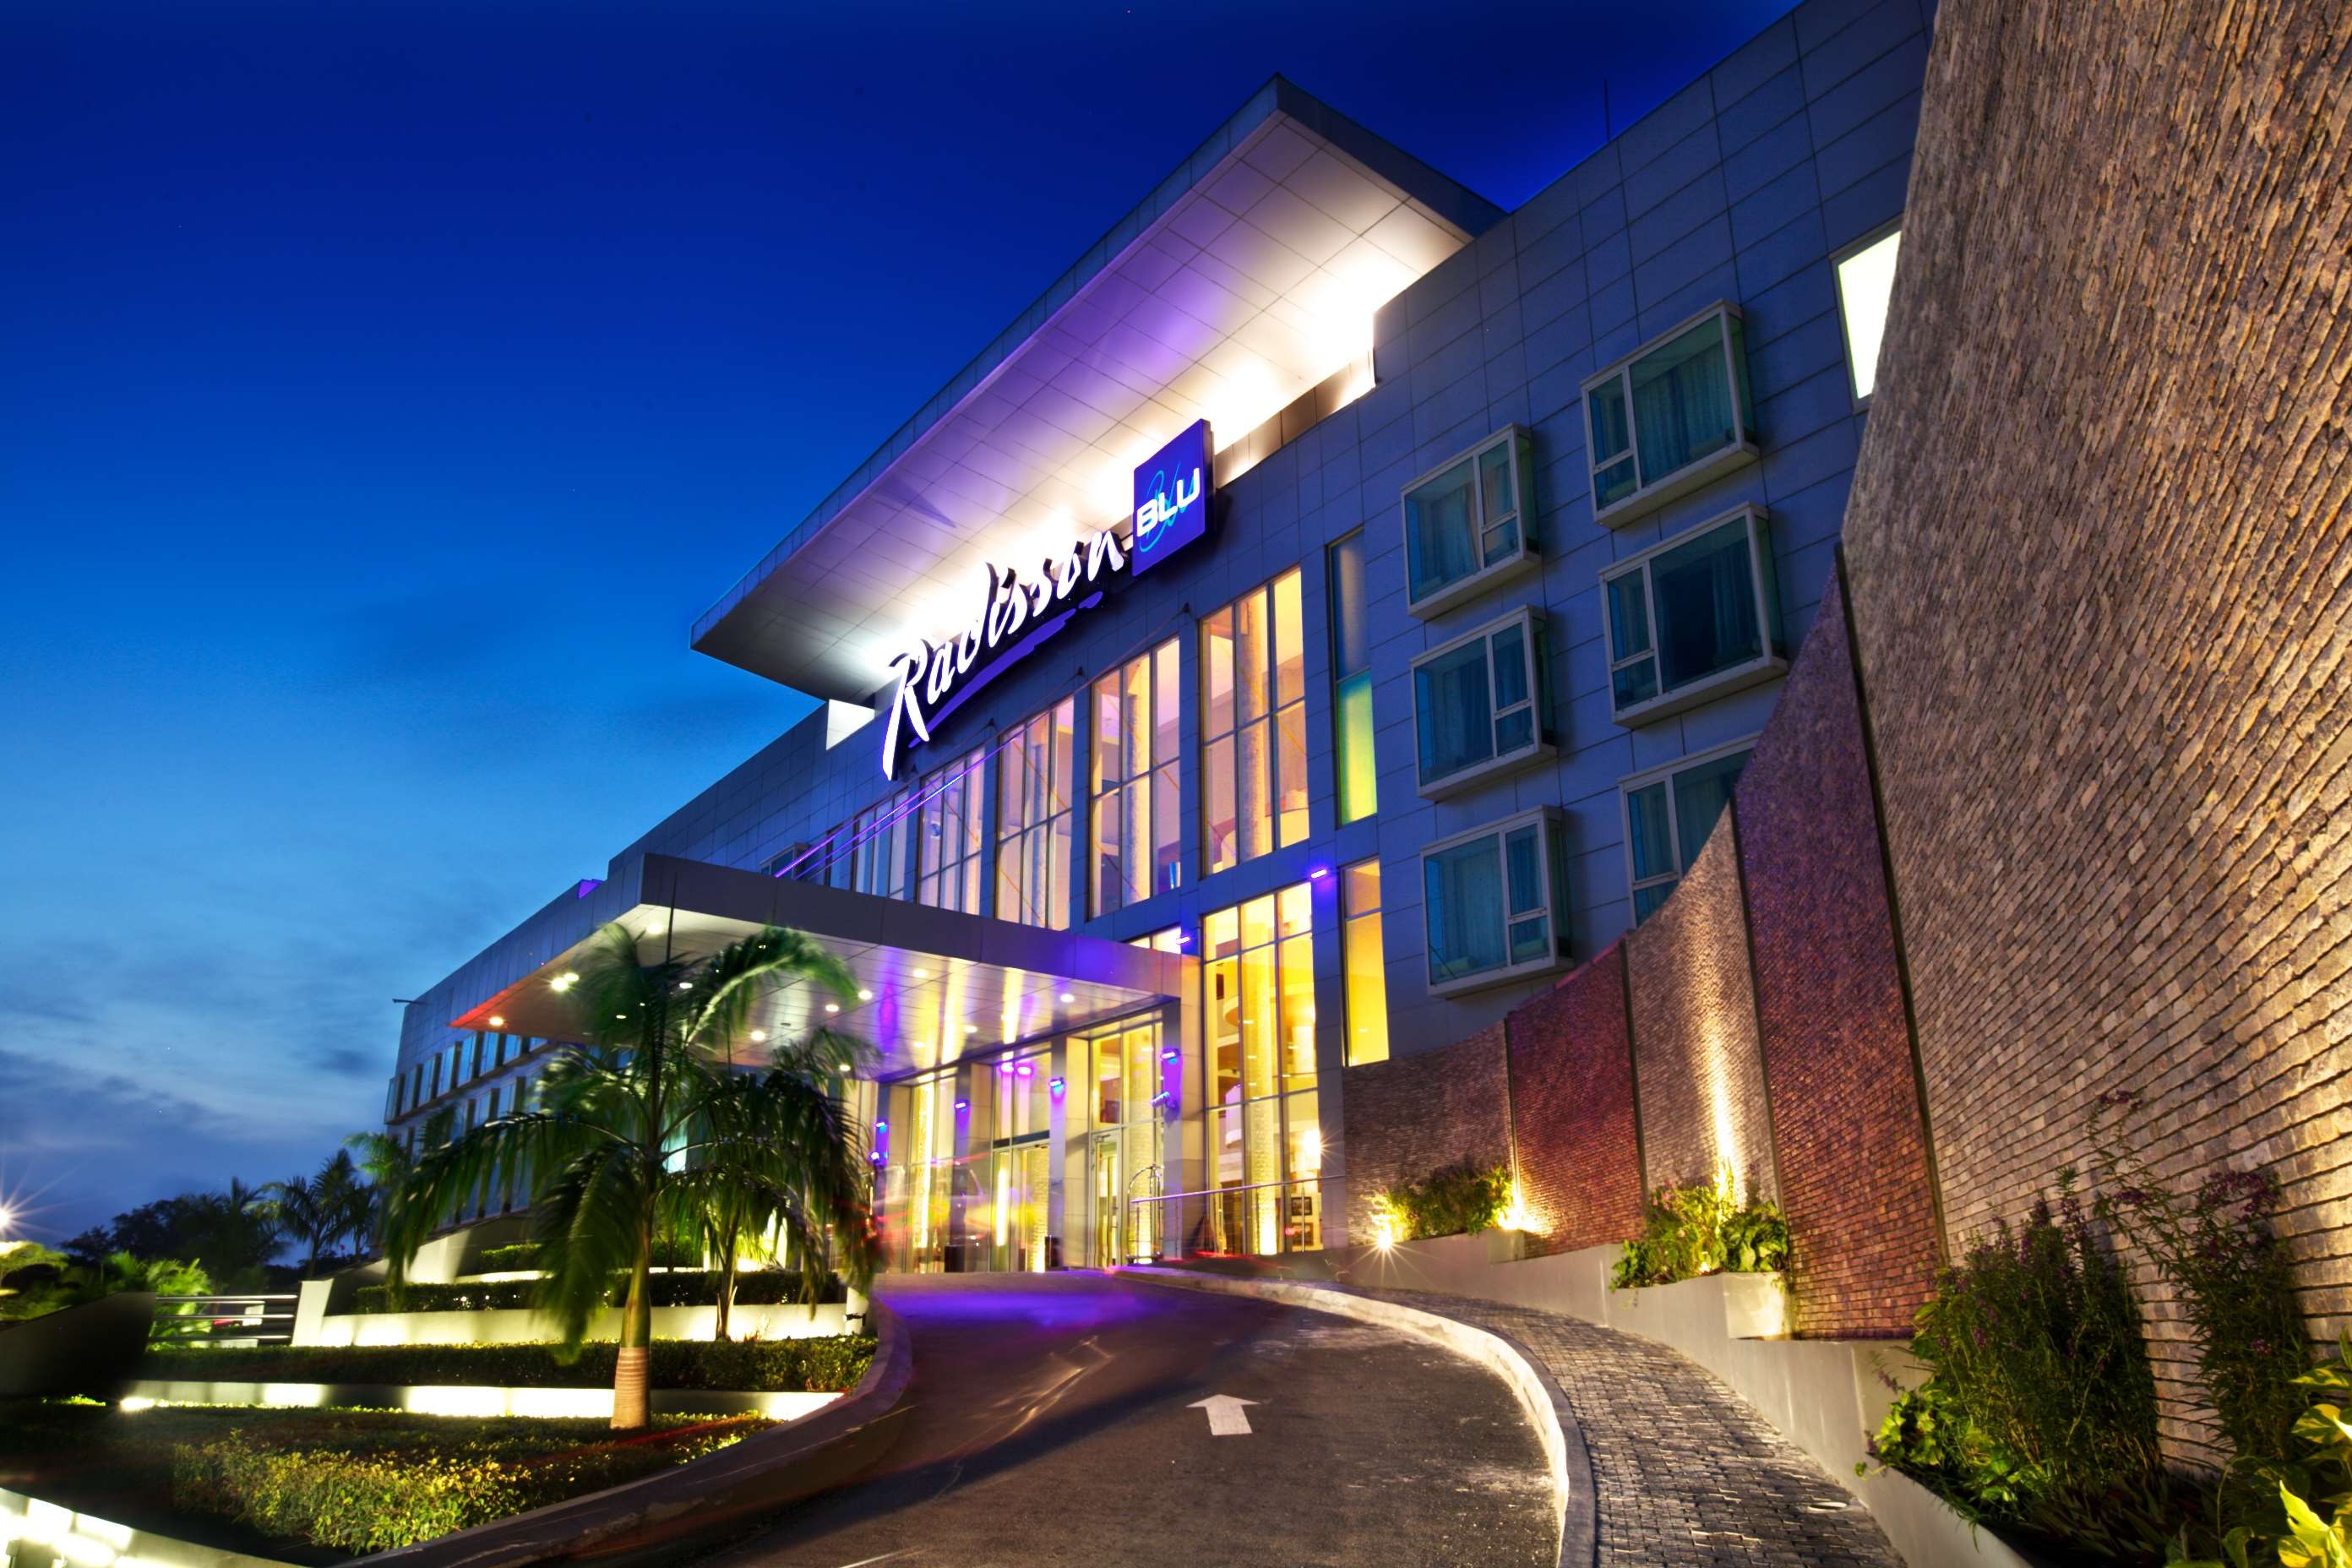 Top 5 Abuja Hotels Perfect for a Weekend Getaway